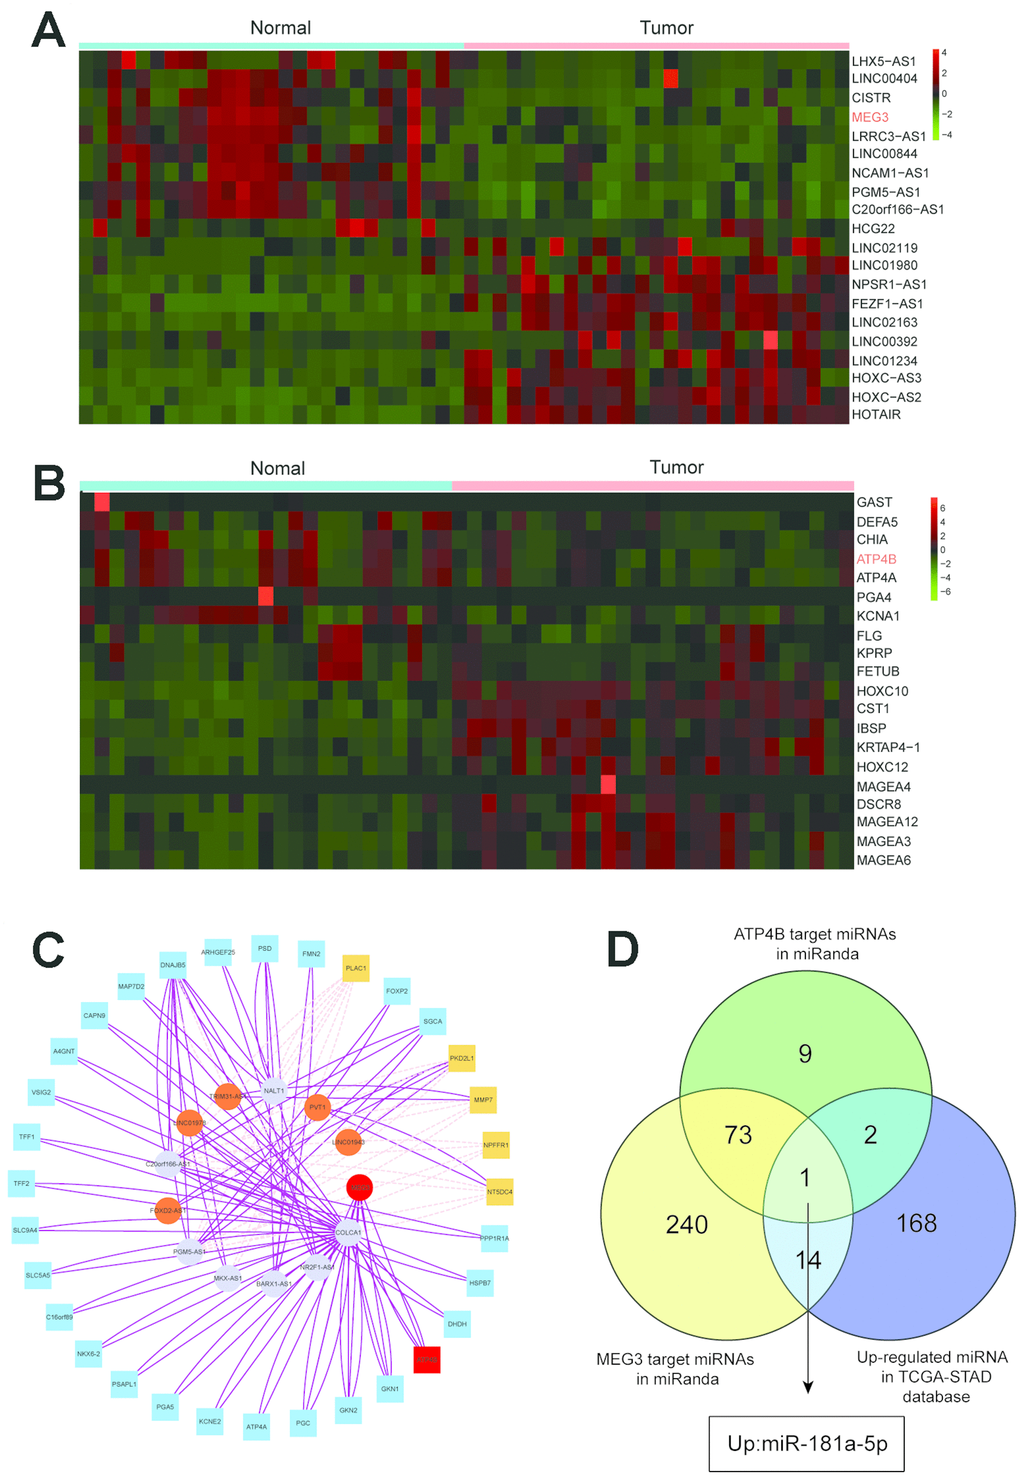 Heat map analysis and target gene prediction. (A) Heat map analysis showed that MEG3 was downregulated among the top 20 differentially expressed lncRNAs in GC tissues and adjacent normal tissues. (B) Heat map analysis showed that the expression of ATP4B was reduced among the top 20 differentially expressed mRNAs between GC tissues and adjacent normal tissues. (C) The network of the relationships between the top twelve differentially expressed genes in lncRNA and the top thirty differentially expressed genes in mRNA. (D) MEG3 and ATP4B are highlighted in a Venn analysis of miRNA associated with gastric cancer from the TCGA database.